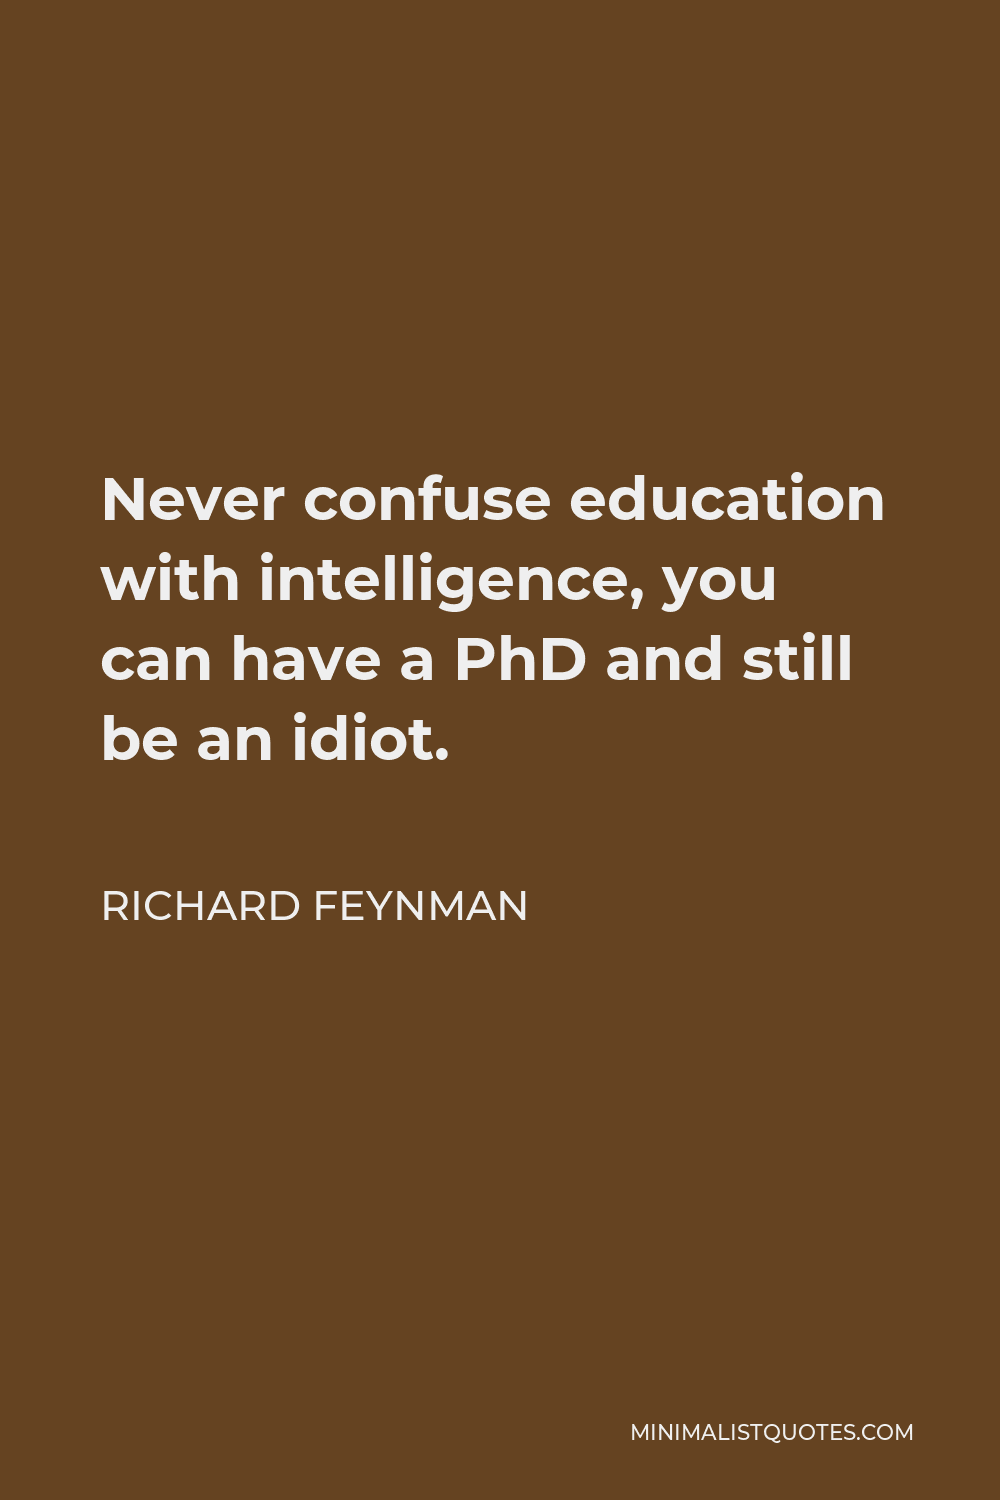 Richard Feynman Quote: Never confuse education with intelligence ...